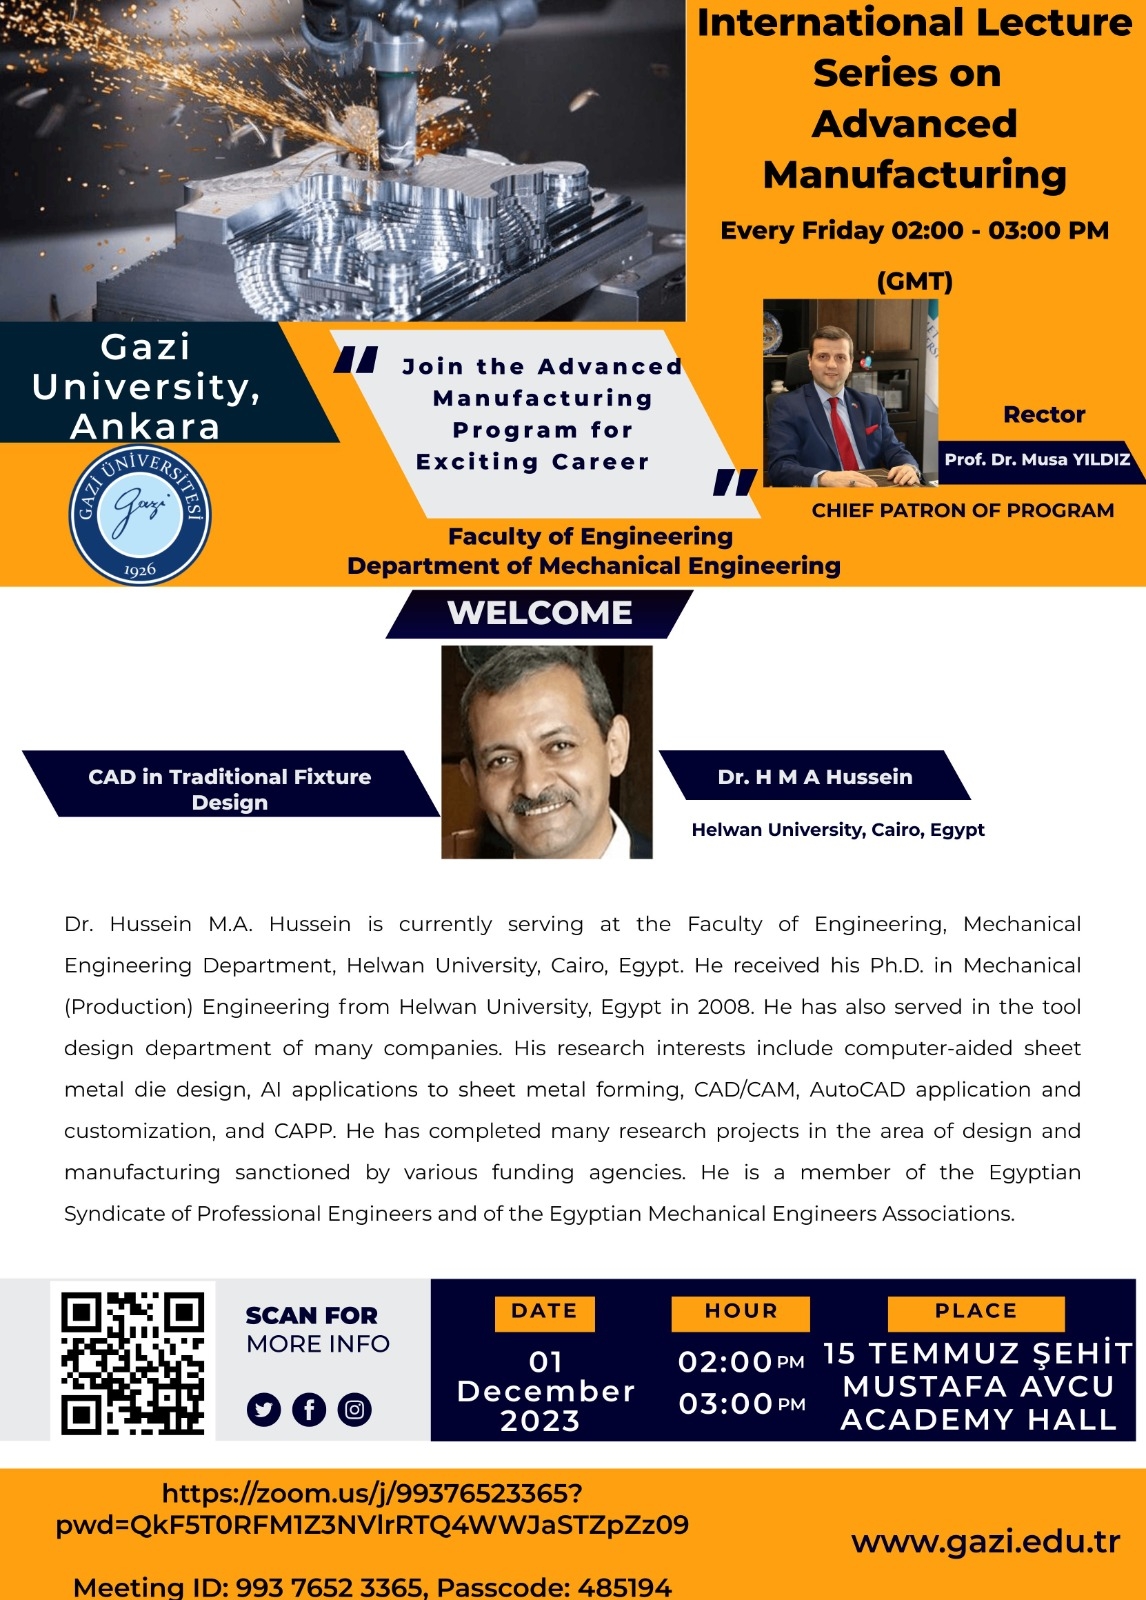 International Lecture Series on Advanced Manufacturing December 1-1